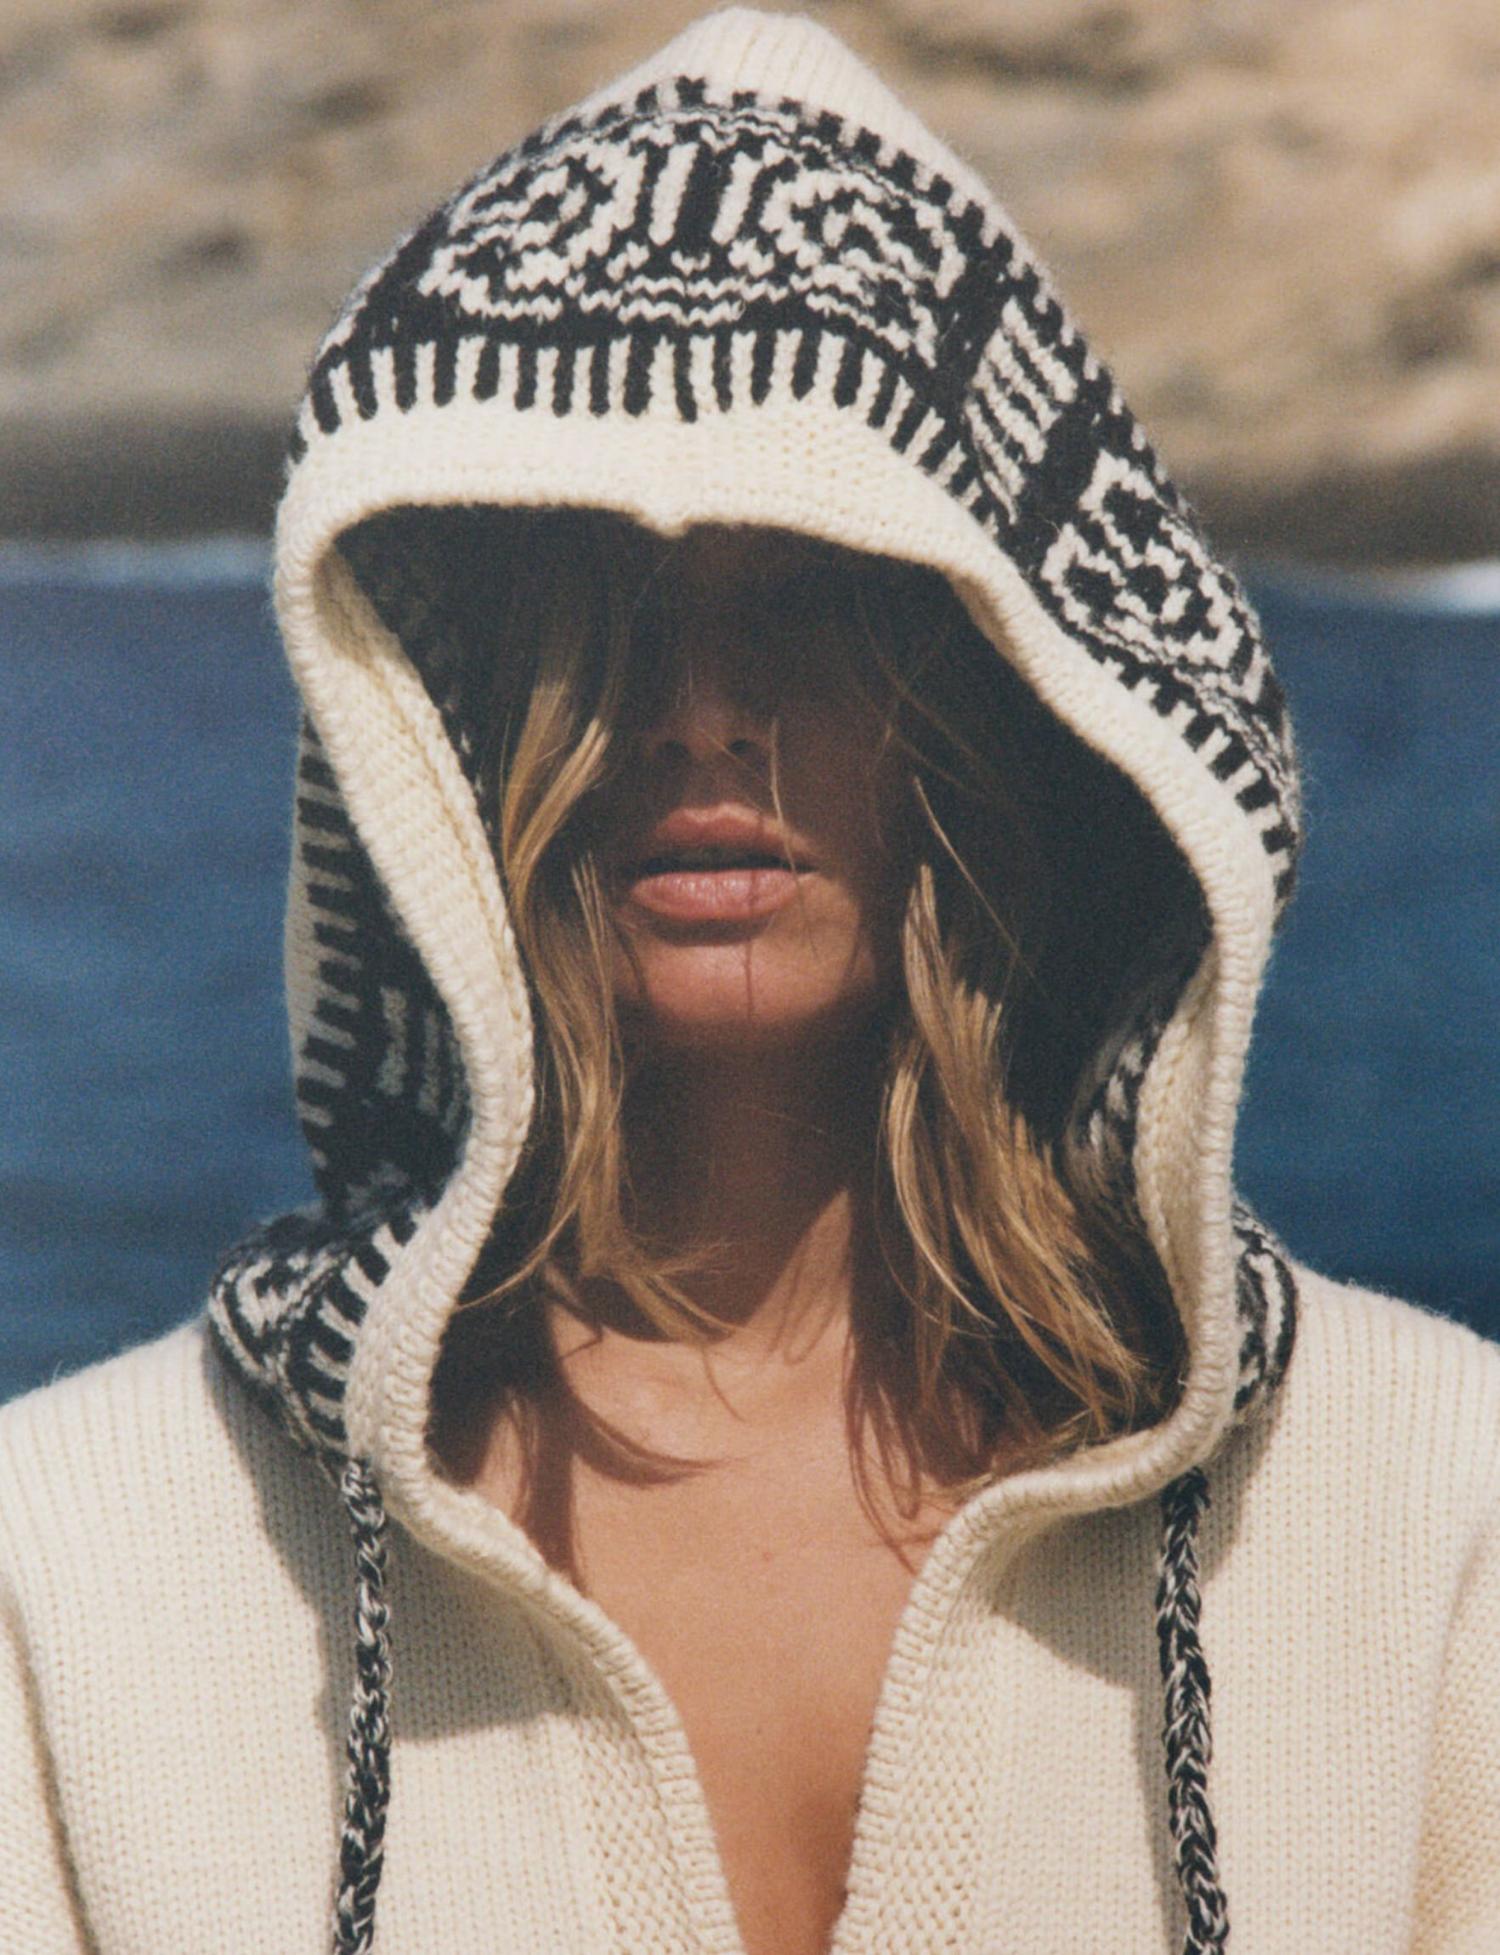 Anna Ewers in Mykonos by Henrik Purienne for Vogue Paris August 2021 Clothing: Sweater by Celine; Makeup using Dior Beauty